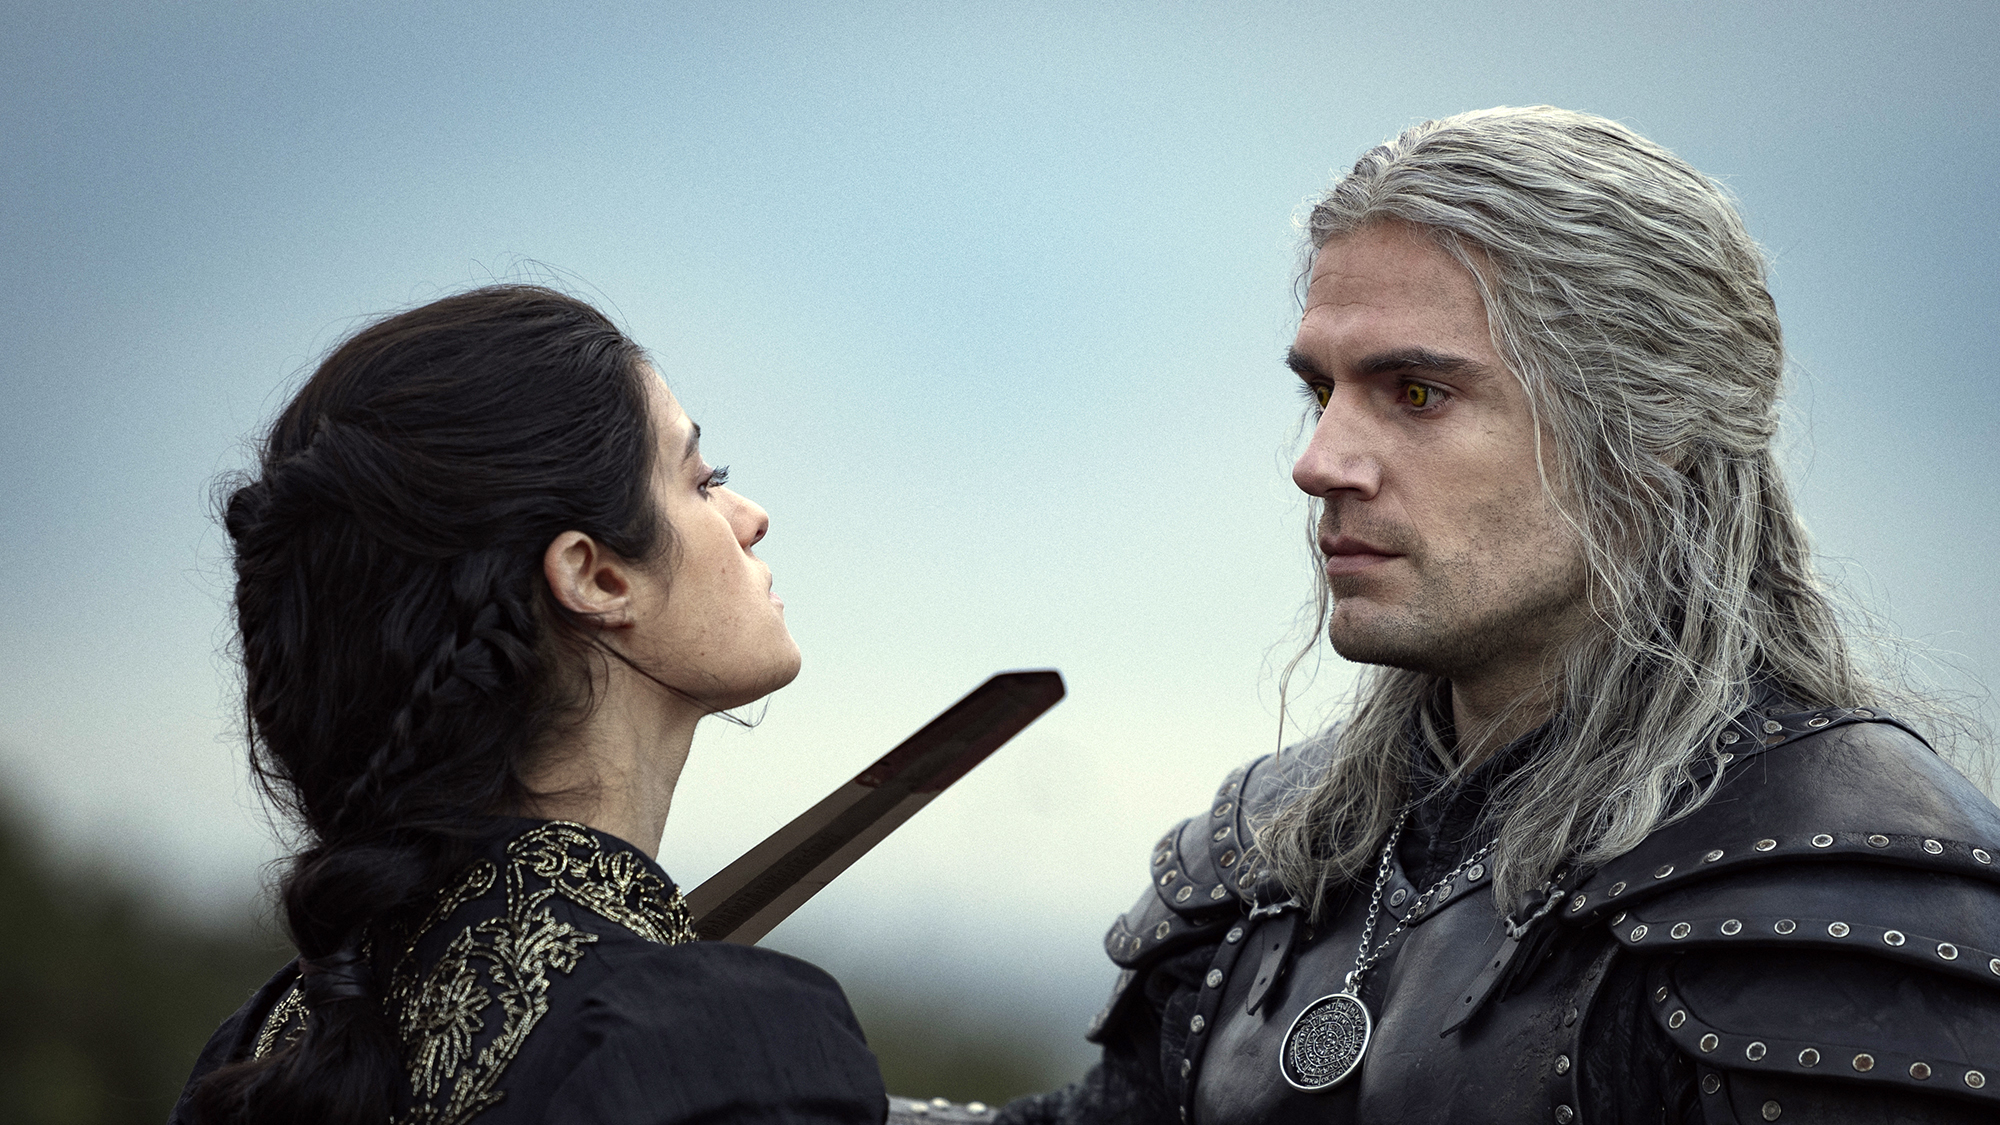 Henry Cavill as Geralt and Anya Chalotra as Yennefer in The Witcher on Netflix